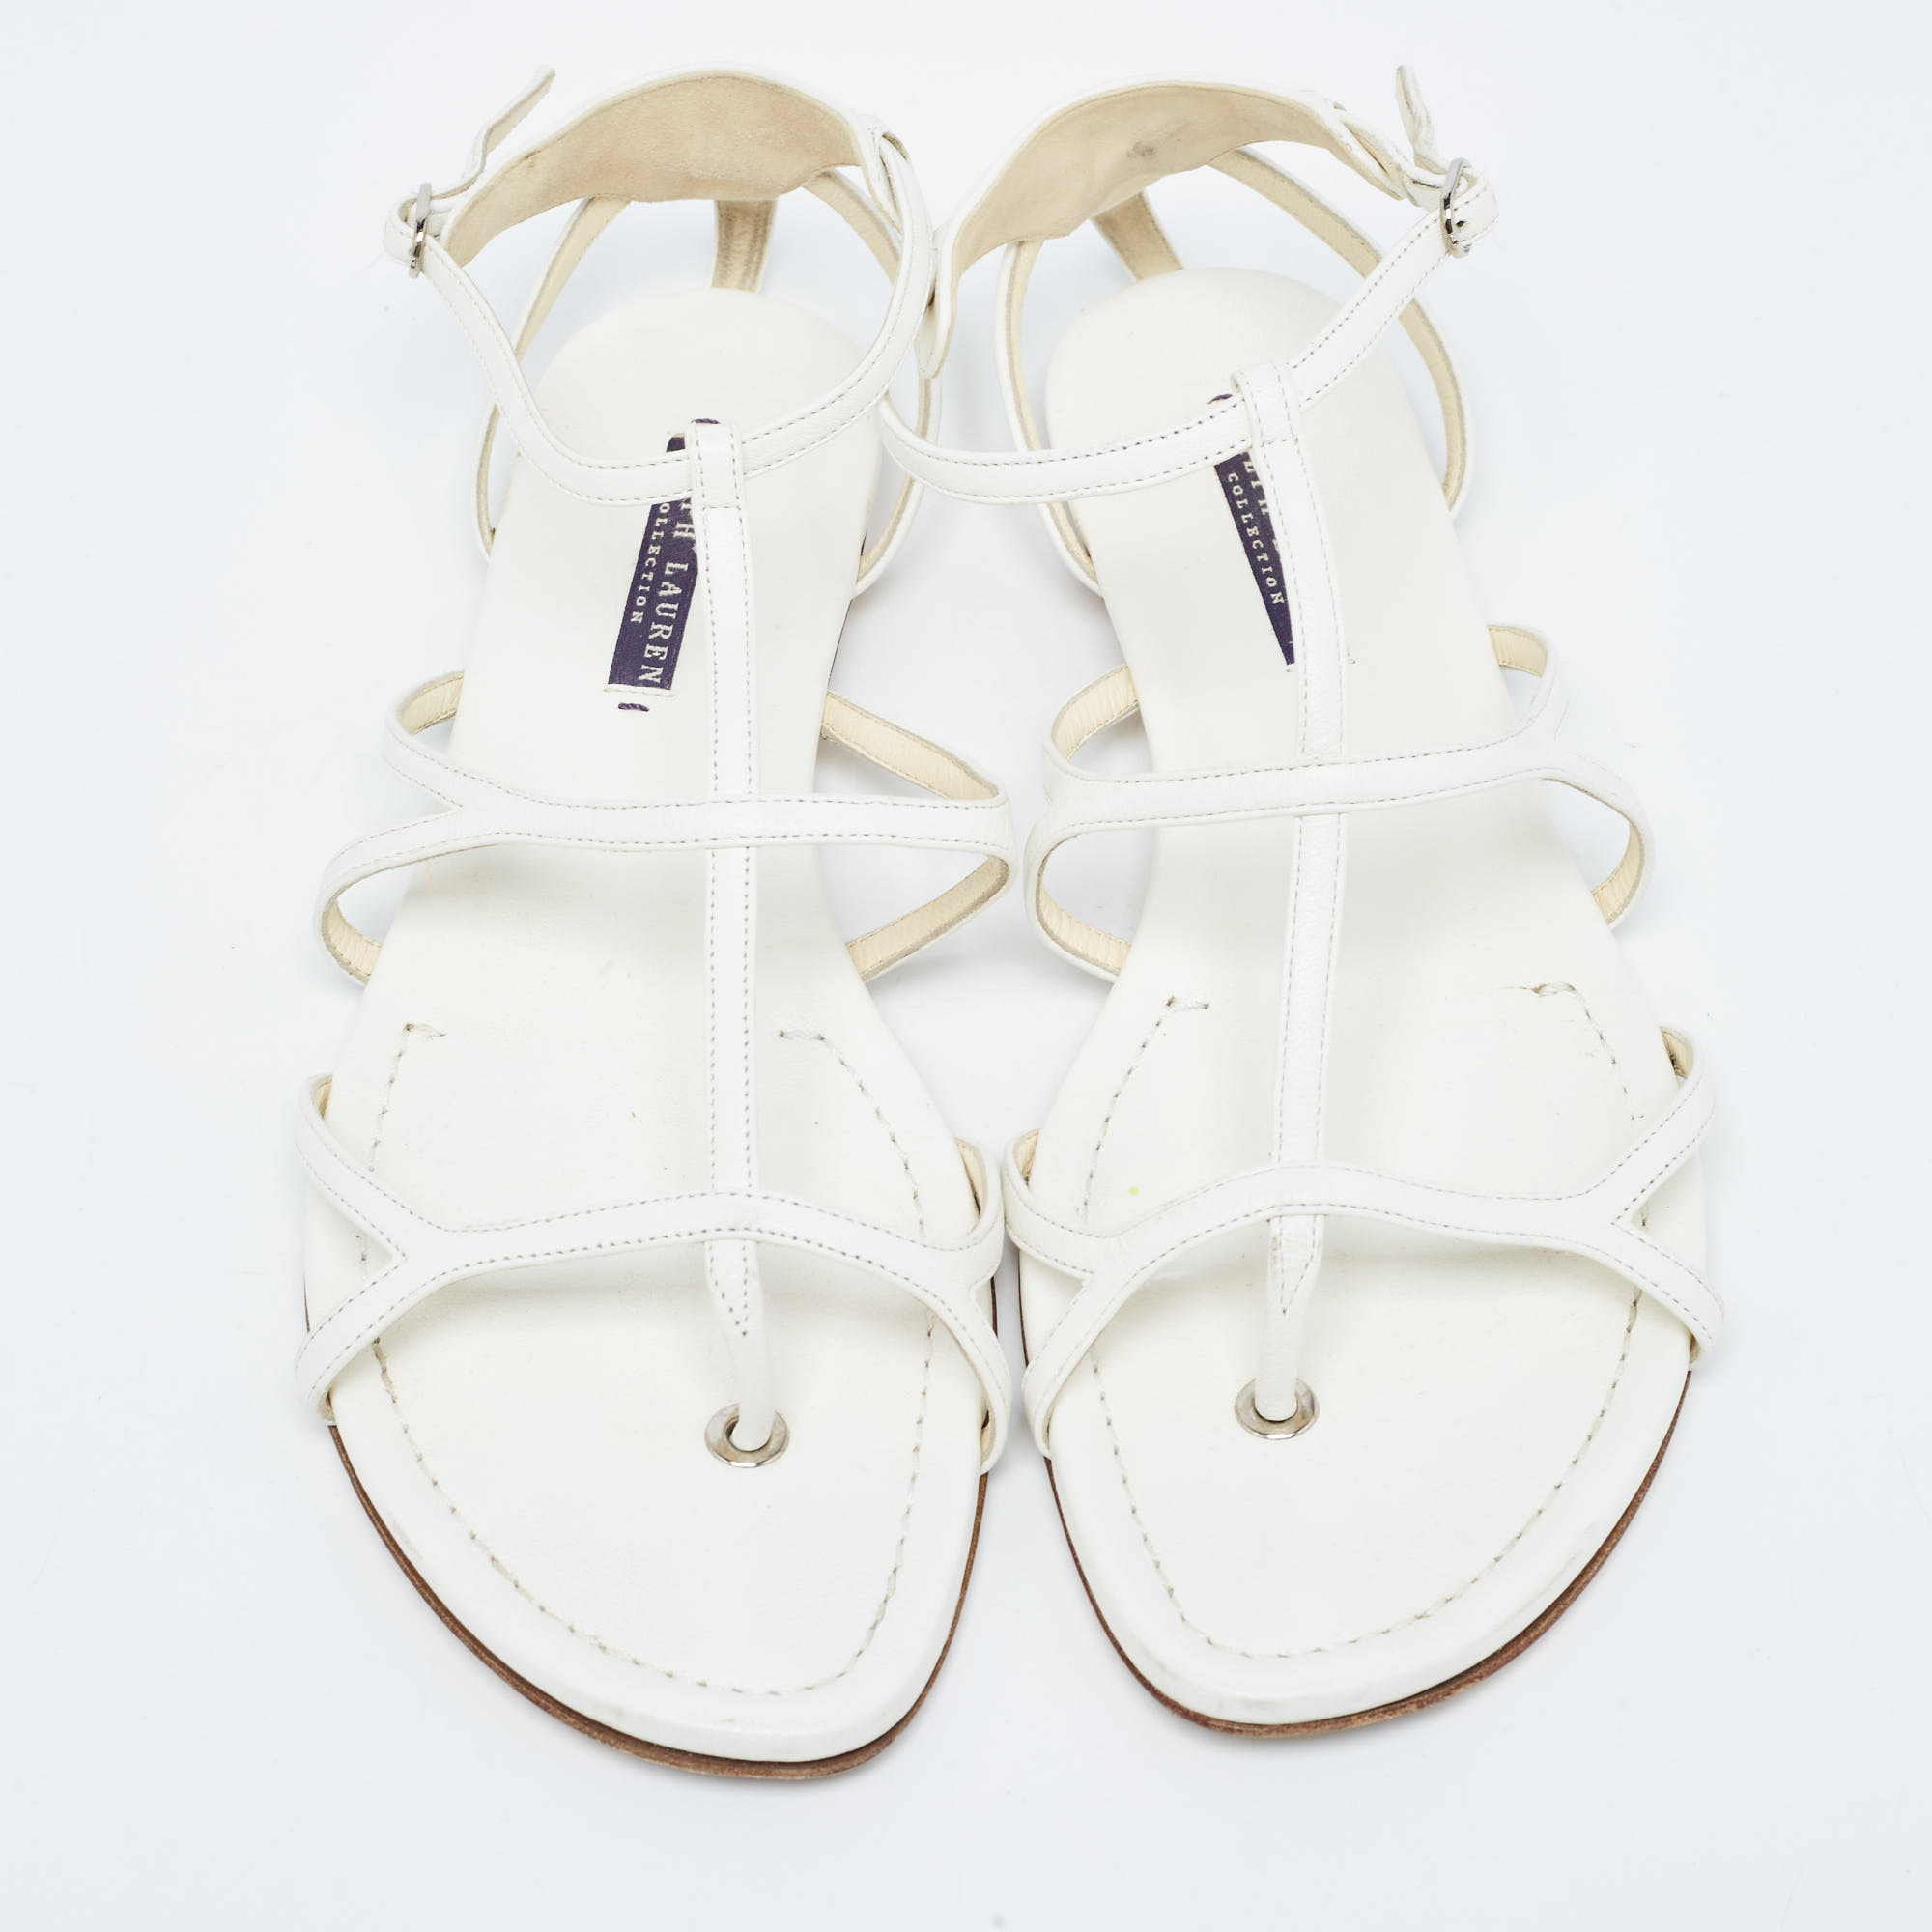 Ralph Lauren Collection White Leather Thong Strappy Flat Sandals Size 41